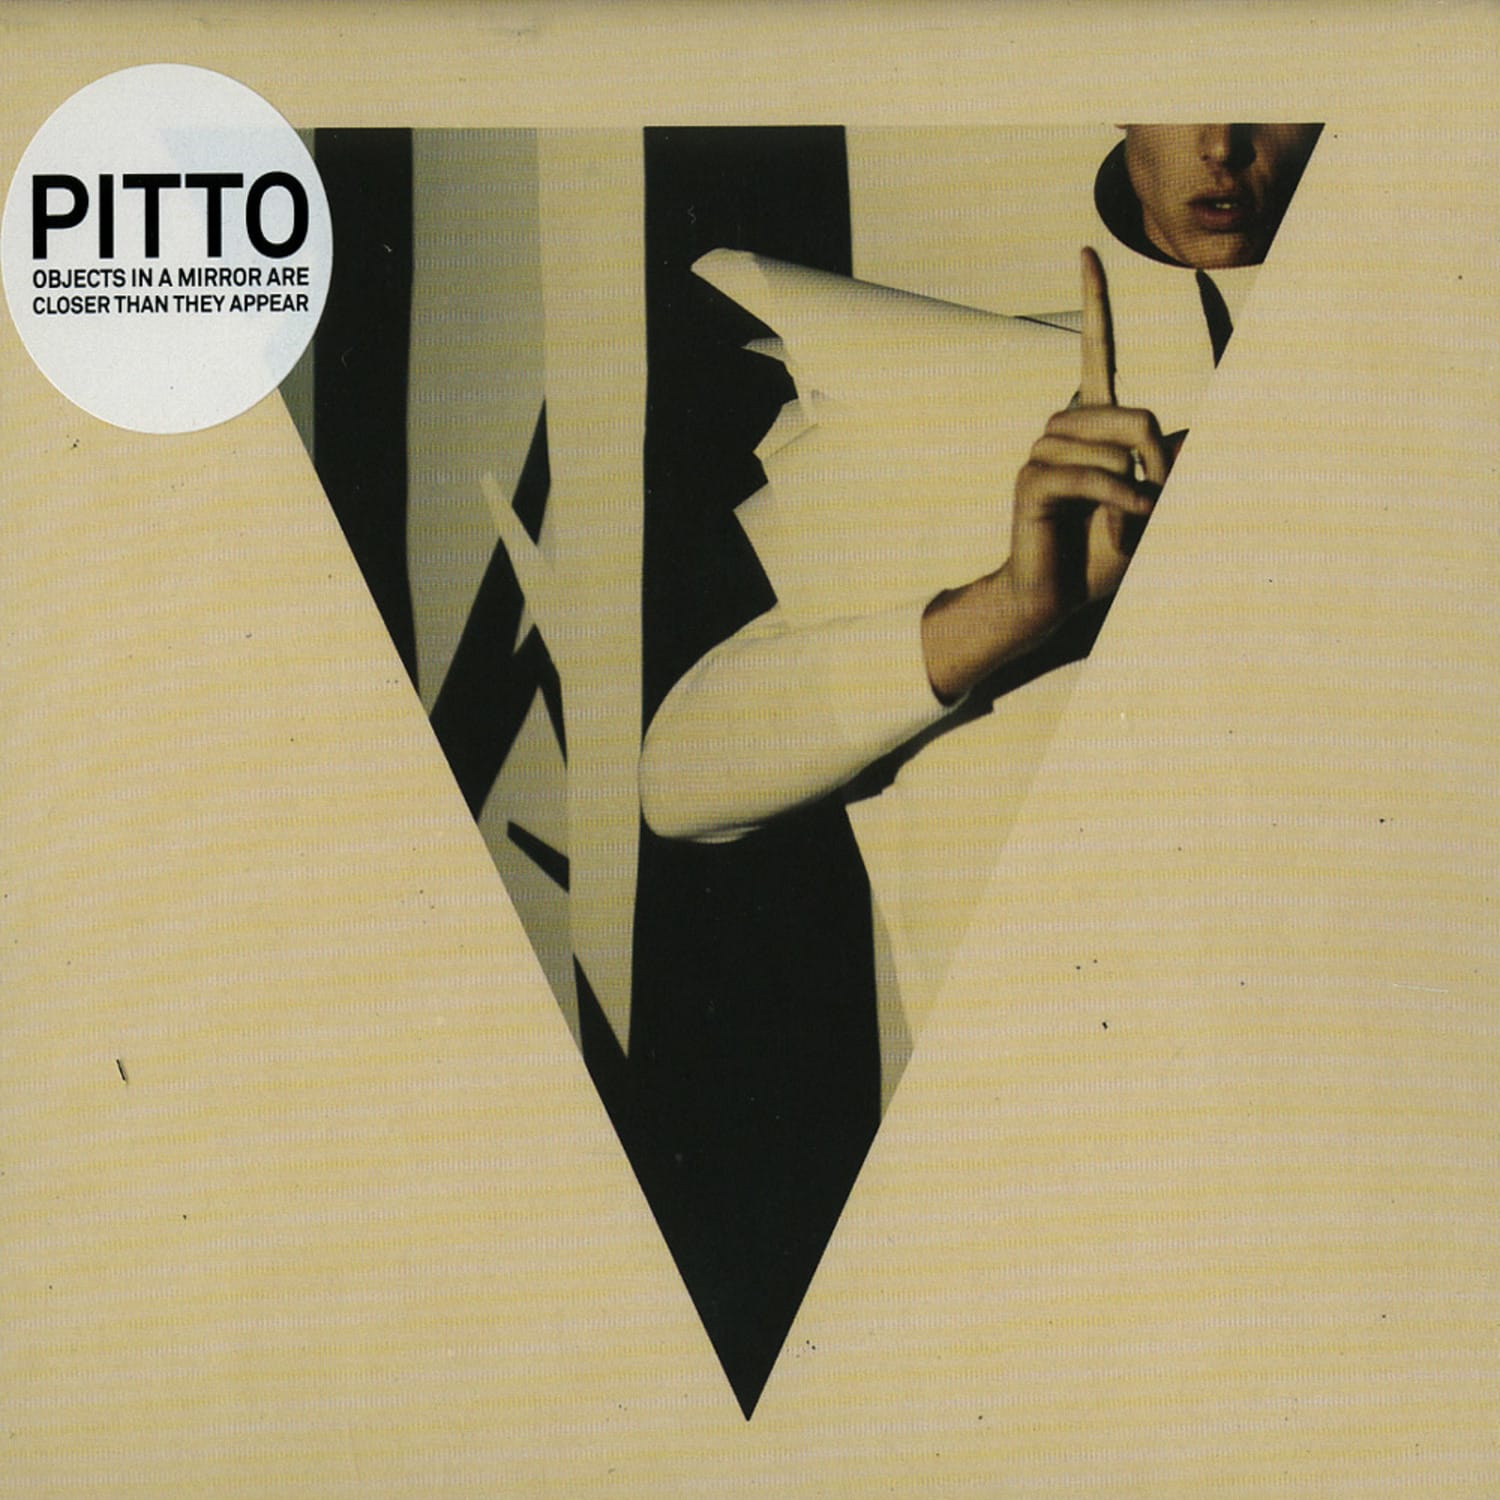 Pitto - OBJECTS IN A MIRROR ARE CLOSER THAN THEY APPEAR 